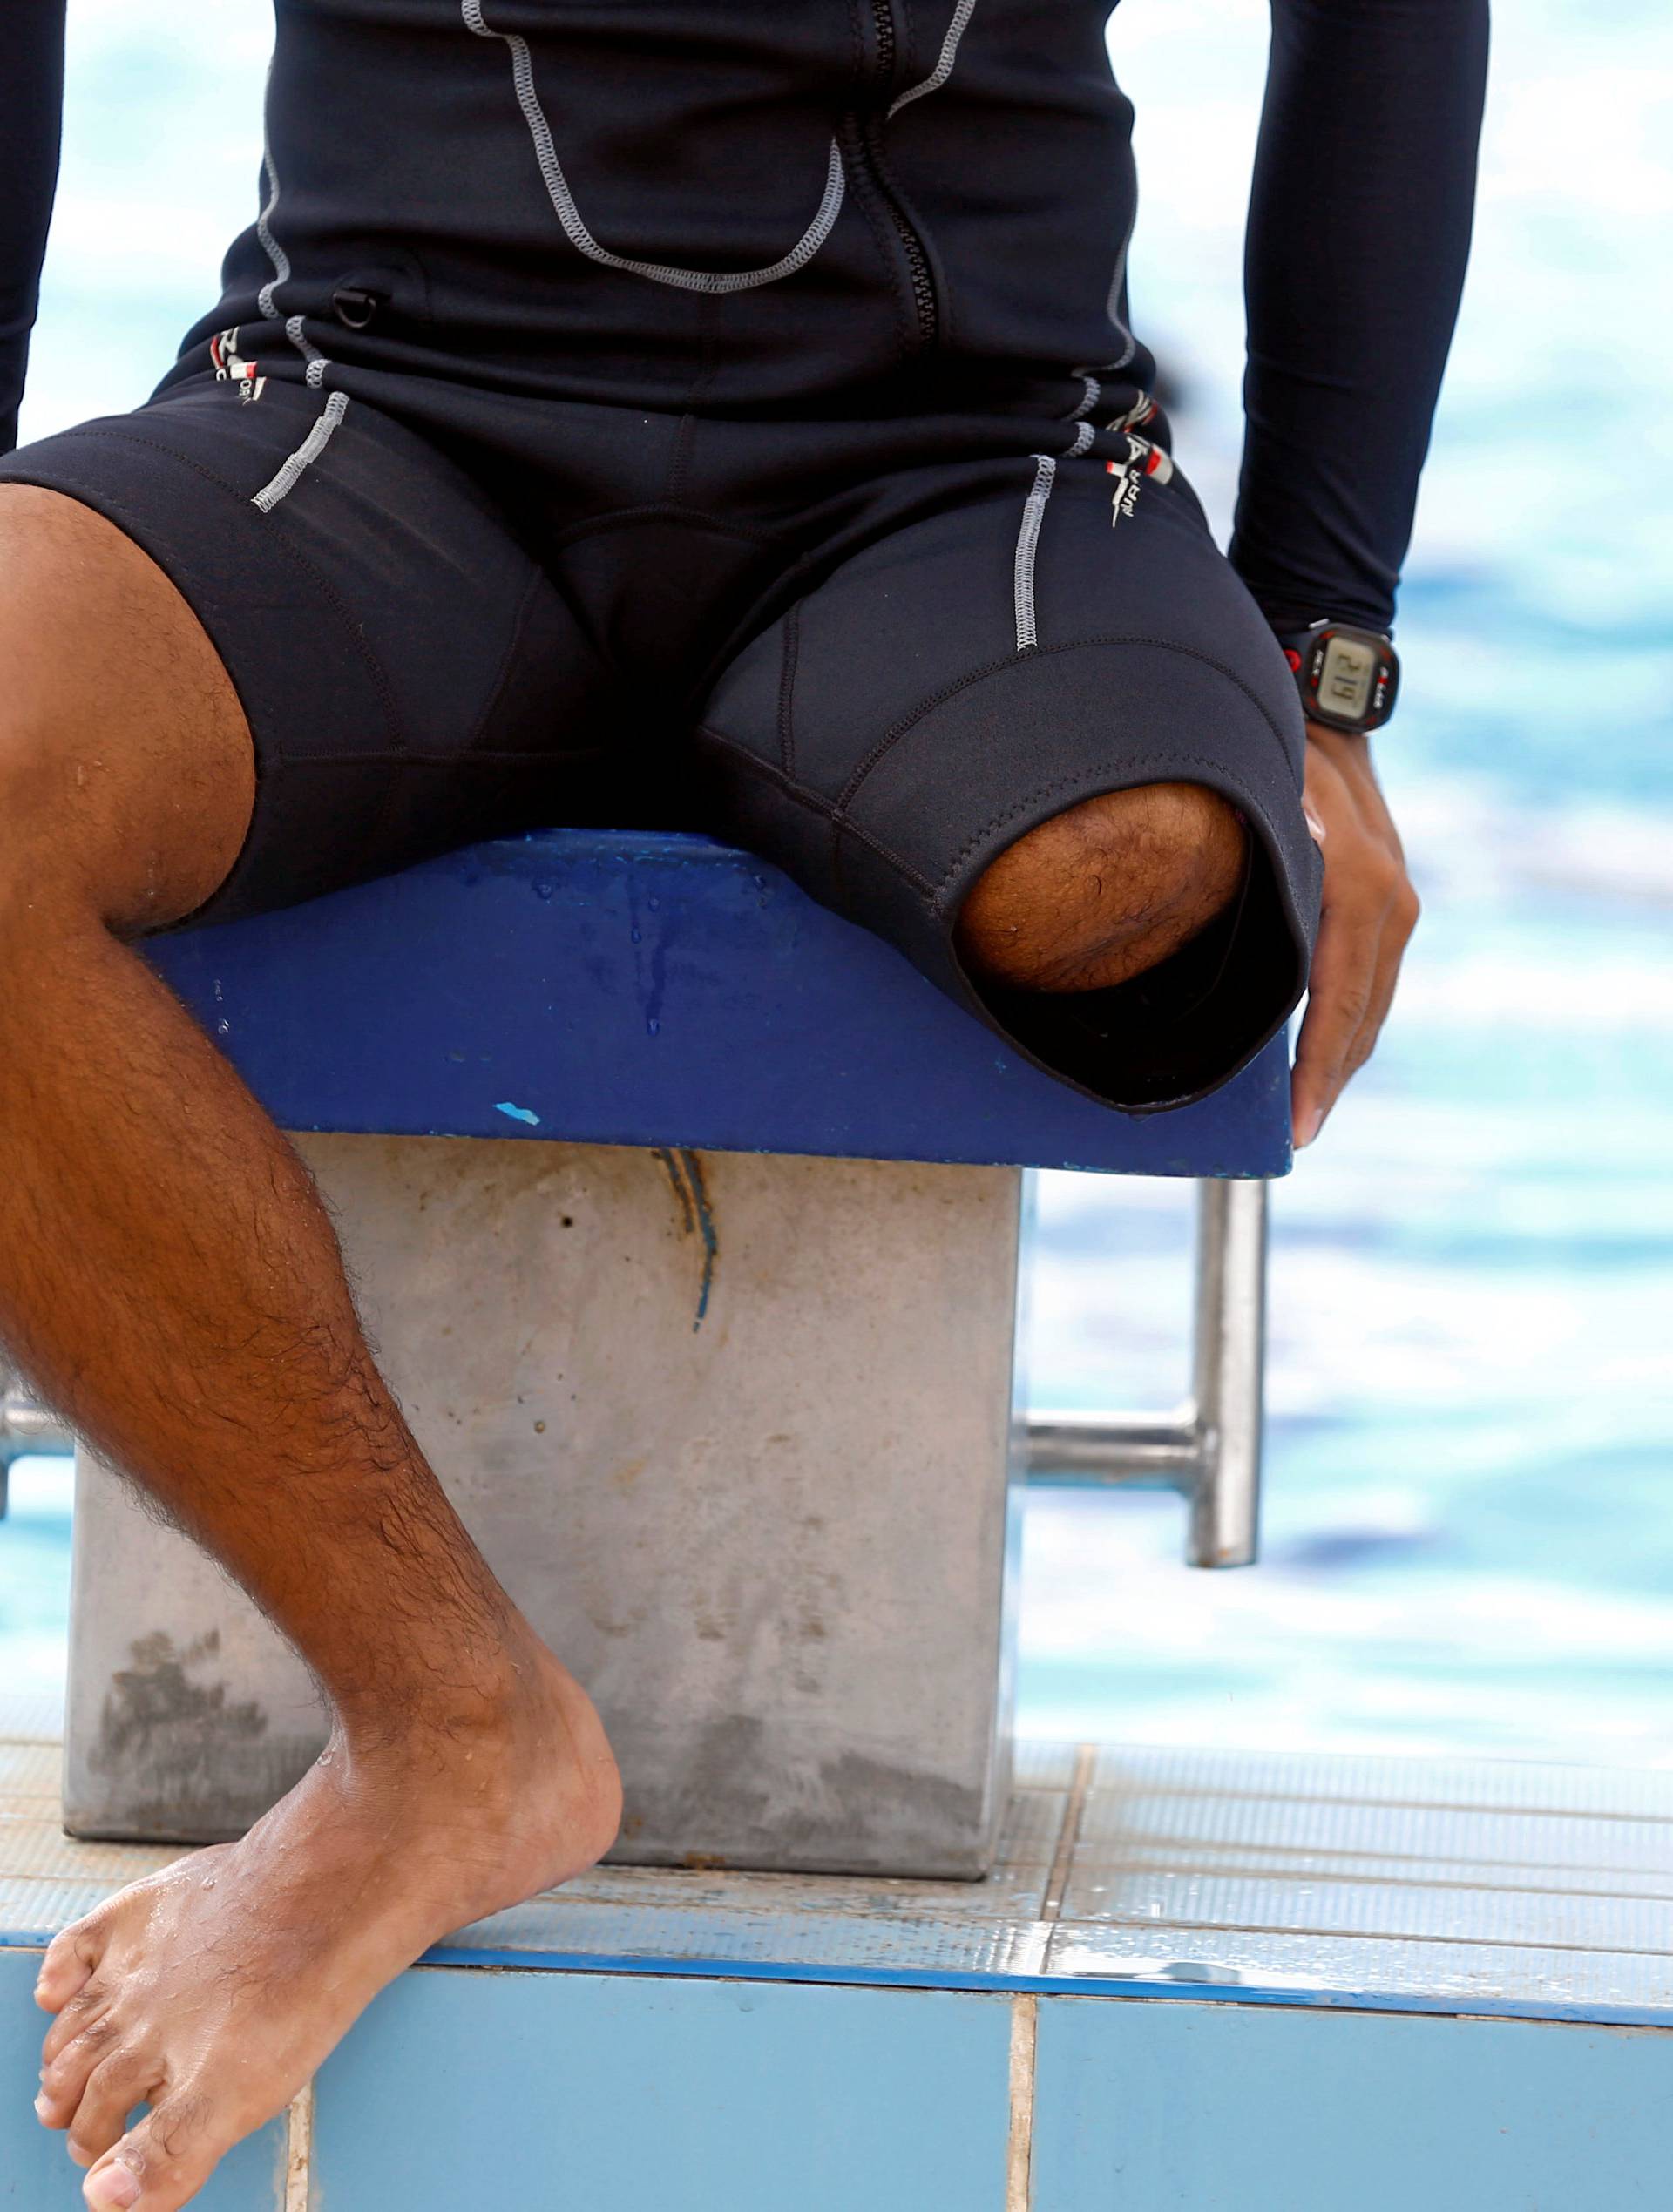 Egyptian swimmer Omar Hegazy, who is the first one-legged man to swim across the Gulf of Aqaba from Egypt to Jordan, rests after practice in Cairo